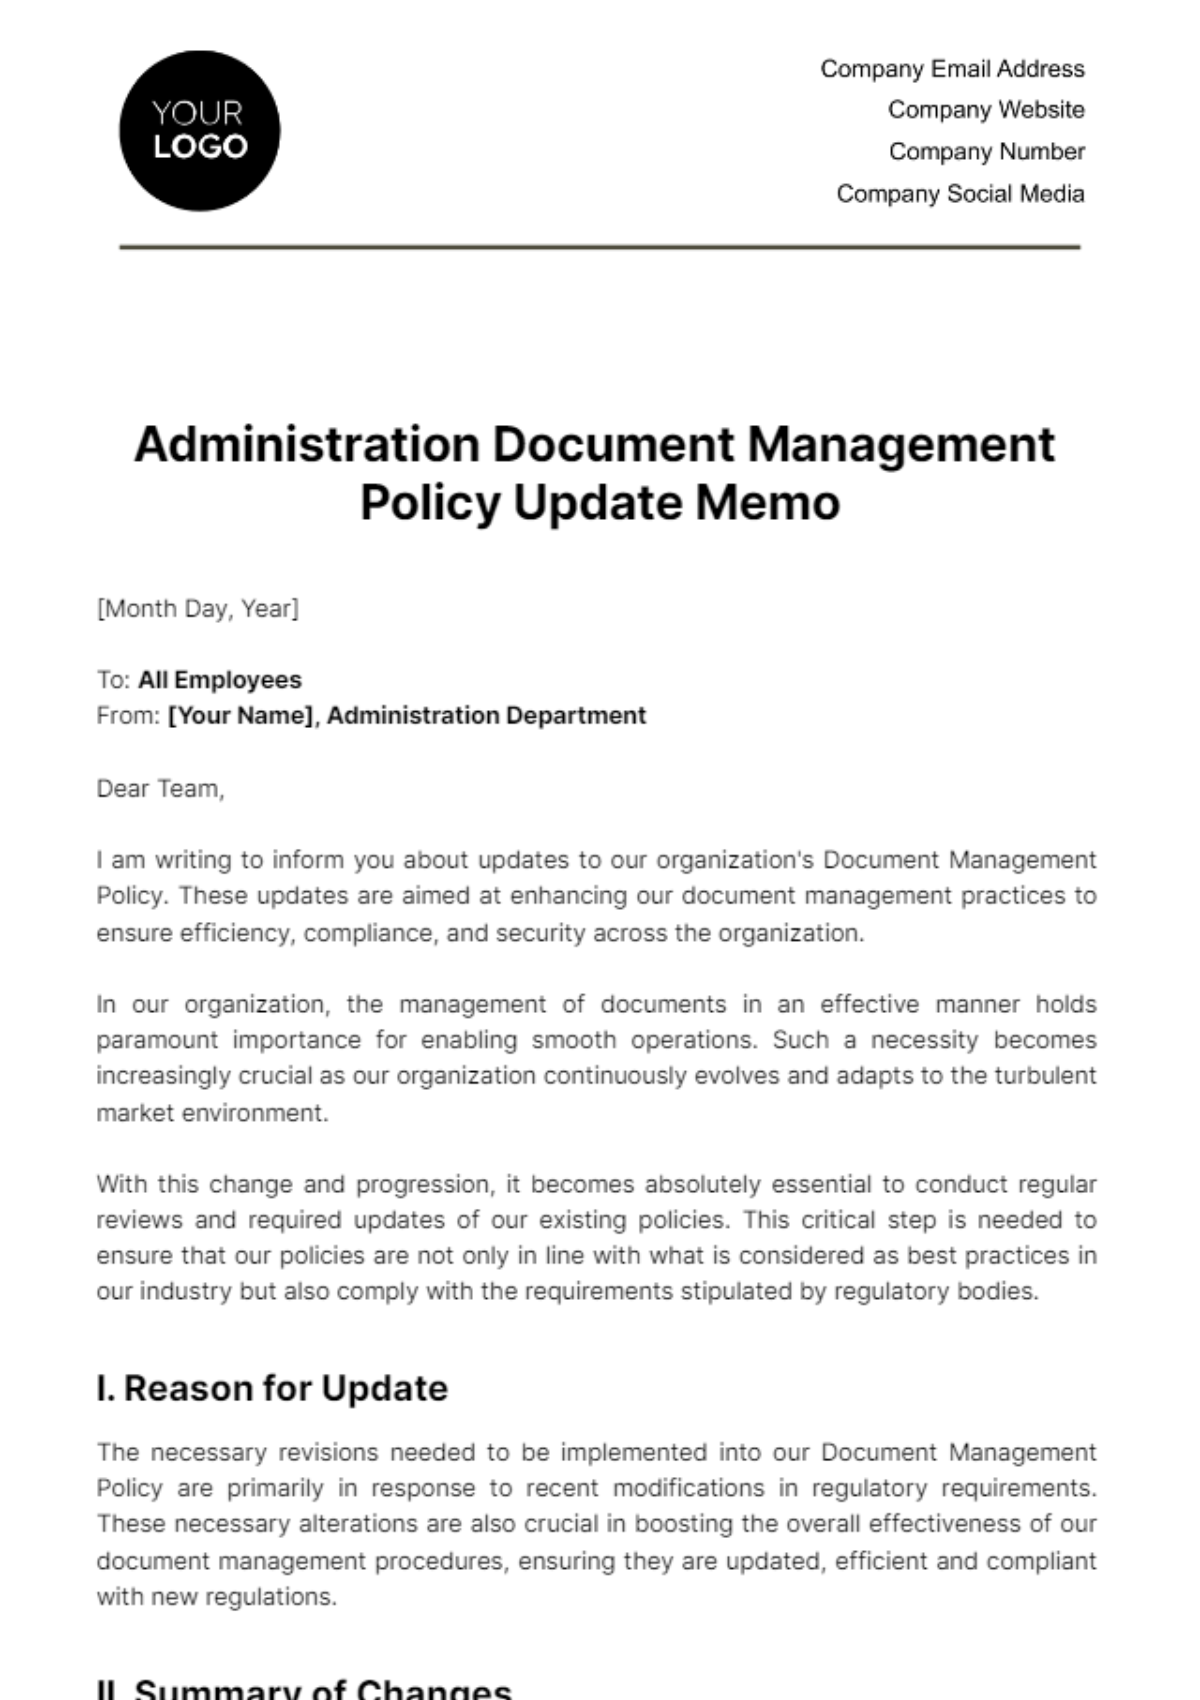 Free Administration Document Management Policy Update Memo Template